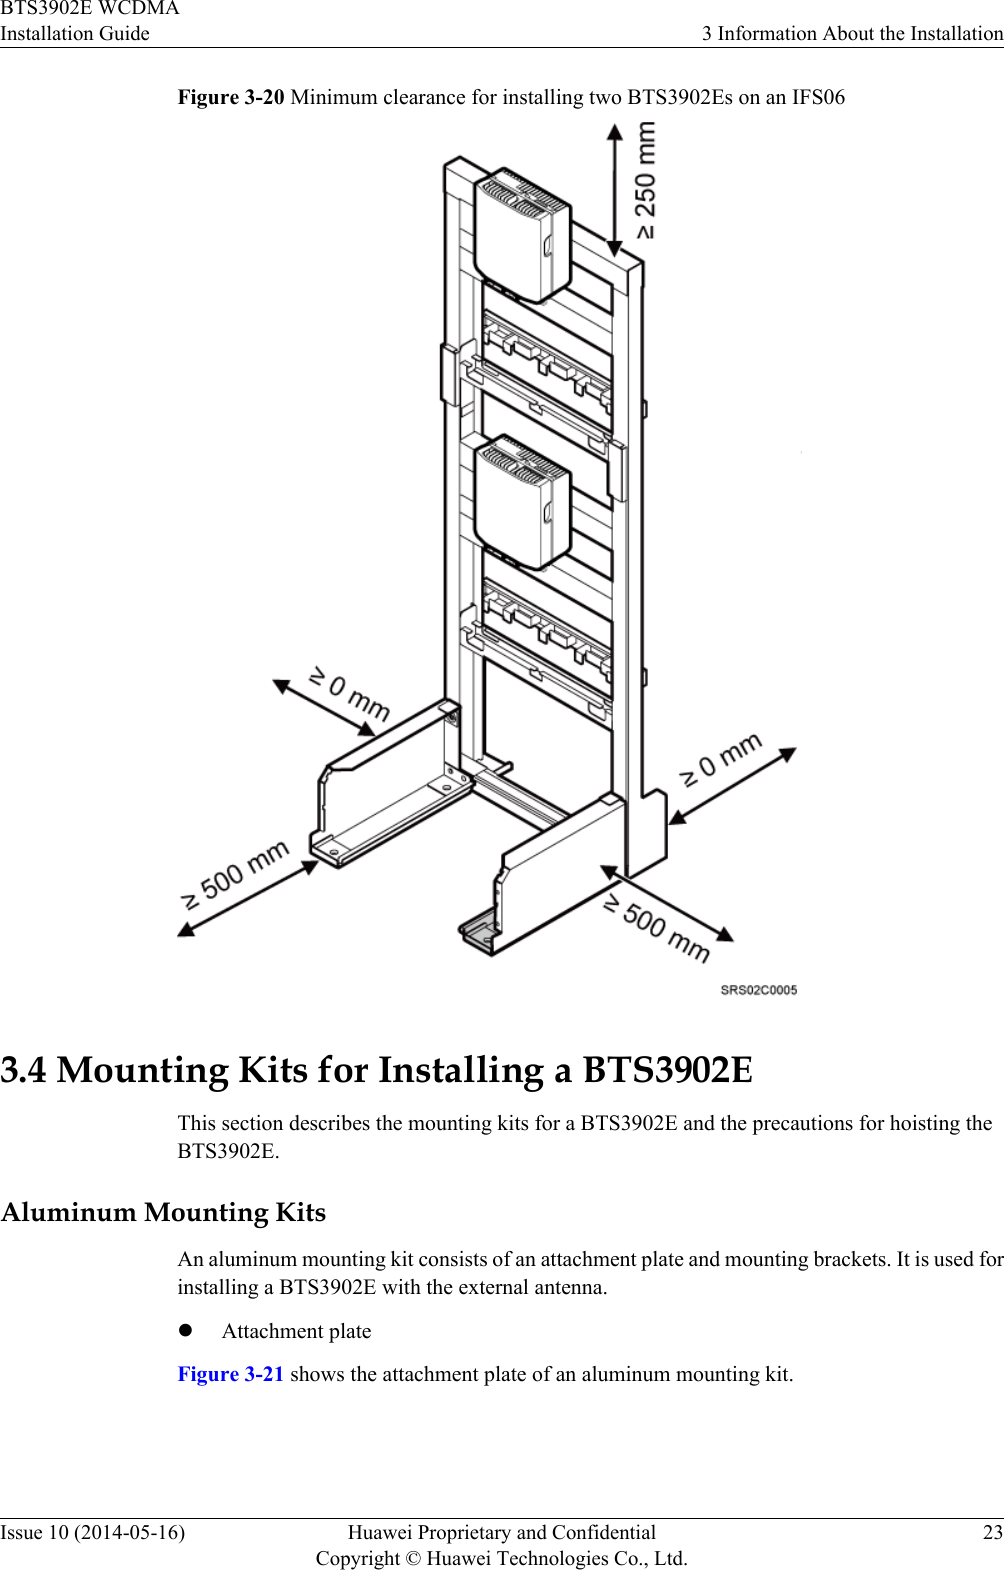 Figure 3-20 Minimum clearance for installing two BTS3902Es on an IFS063.4 Mounting Kits for Installing a BTS3902EThis section describes the mounting kits for a BTS3902E and the precautions for hoisting theBTS3902E.Aluminum Mounting KitsAn aluminum mounting kit consists of an attachment plate and mounting brackets. It is used forinstalling a BTS3902E with the external antenna.lAttachment plateFigure 3-21 shows the attachment plate of an aluminum mounting kit.BTS3902E WCDMAInstallation Guide 3 Information About the InstallationIssue 10 (2014-05-16) Huawei Proprietary and ConfidentialCopyright © Huawei Technologies Co., Ltd.23